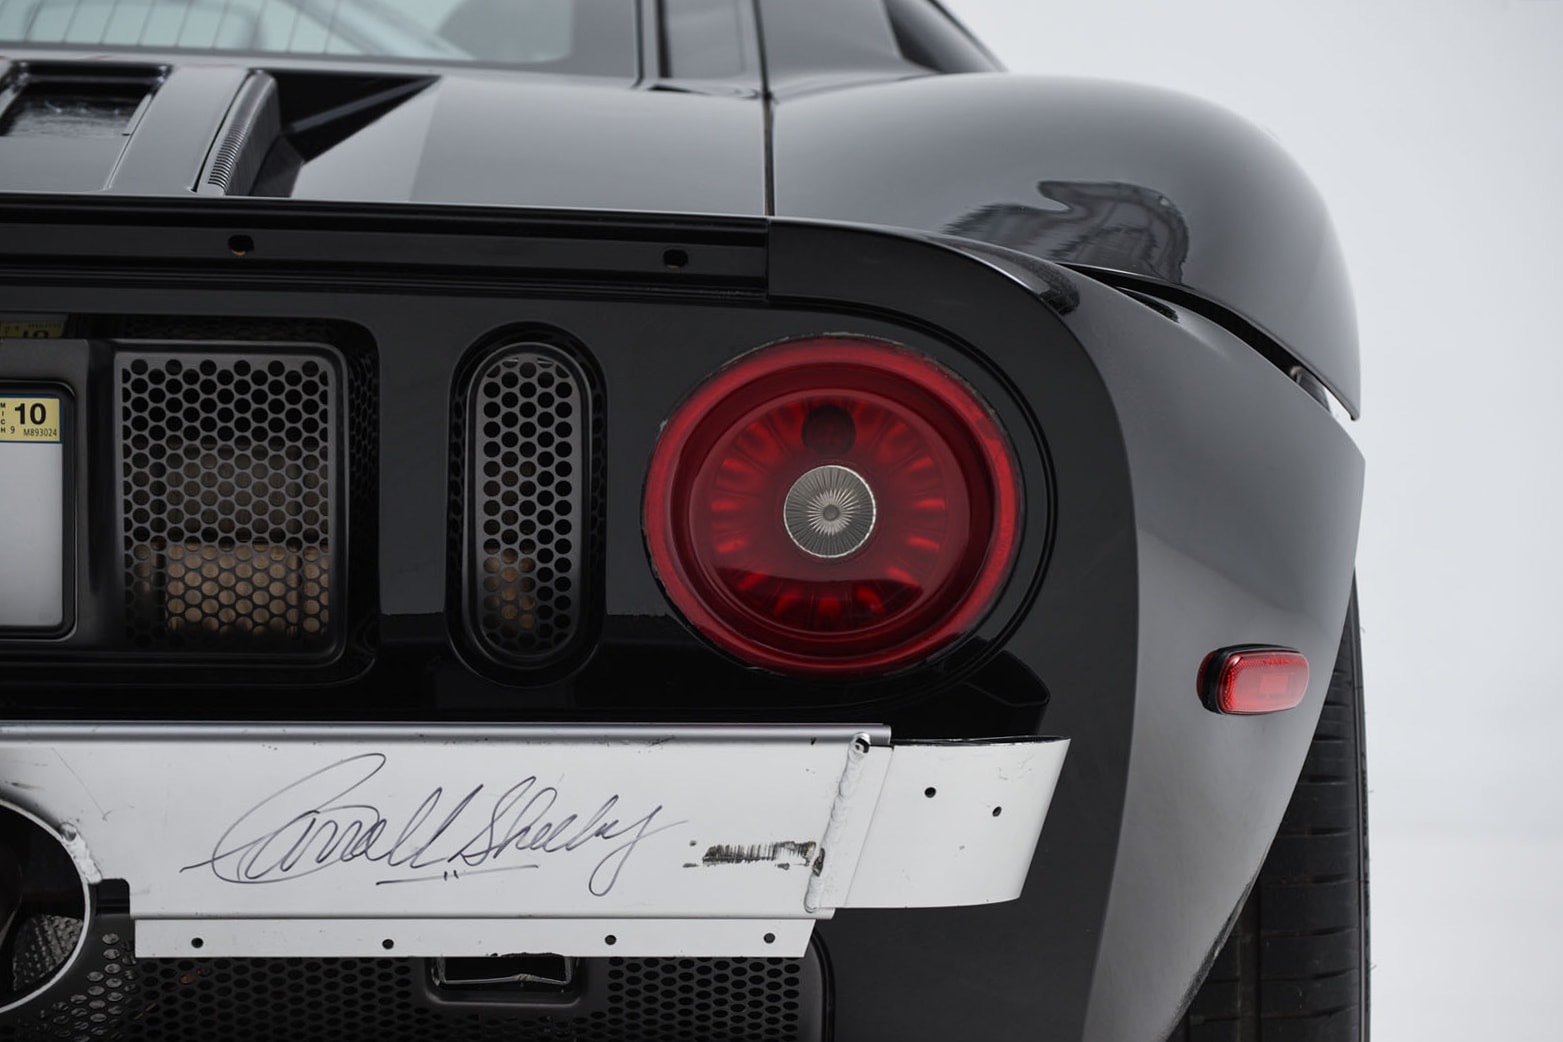 Ford GT Prototype Auction Carroll Shelby Bill Ford